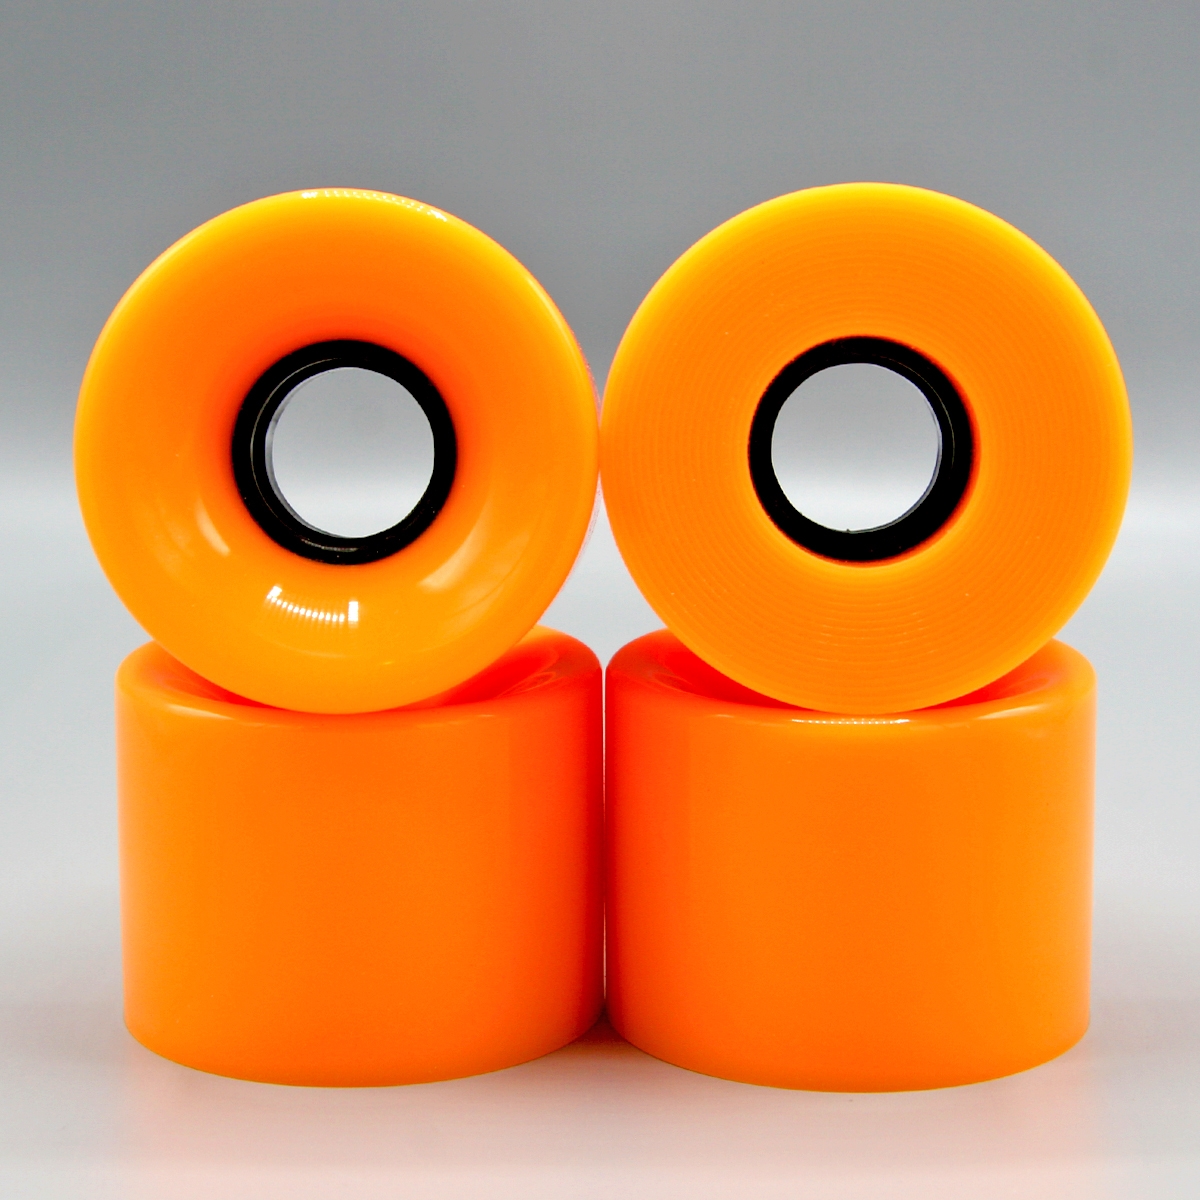 Blank 60mm (Solid Orange) - Includes 1/4" Risers